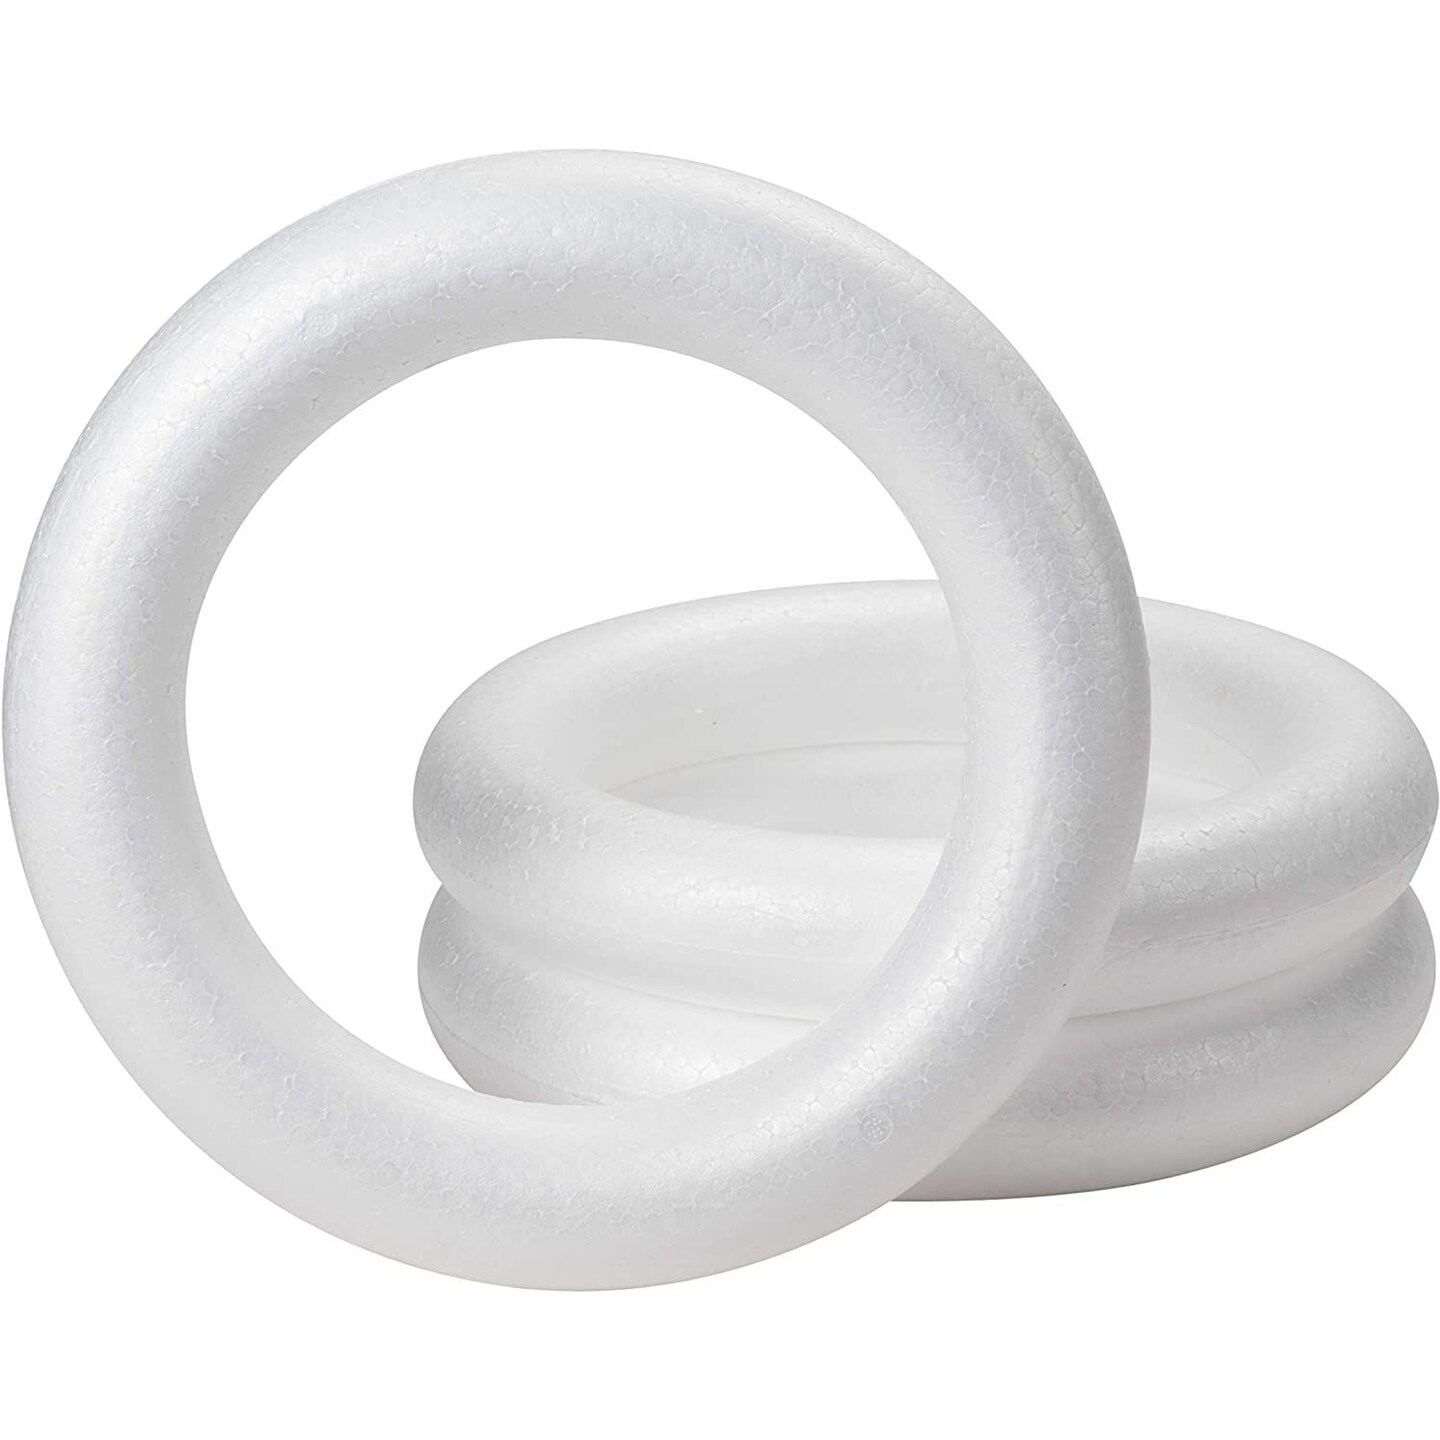 Set of 10 Small Rubber Rings for Craft and Engineering Projects | Elastic  and Frictional Rings